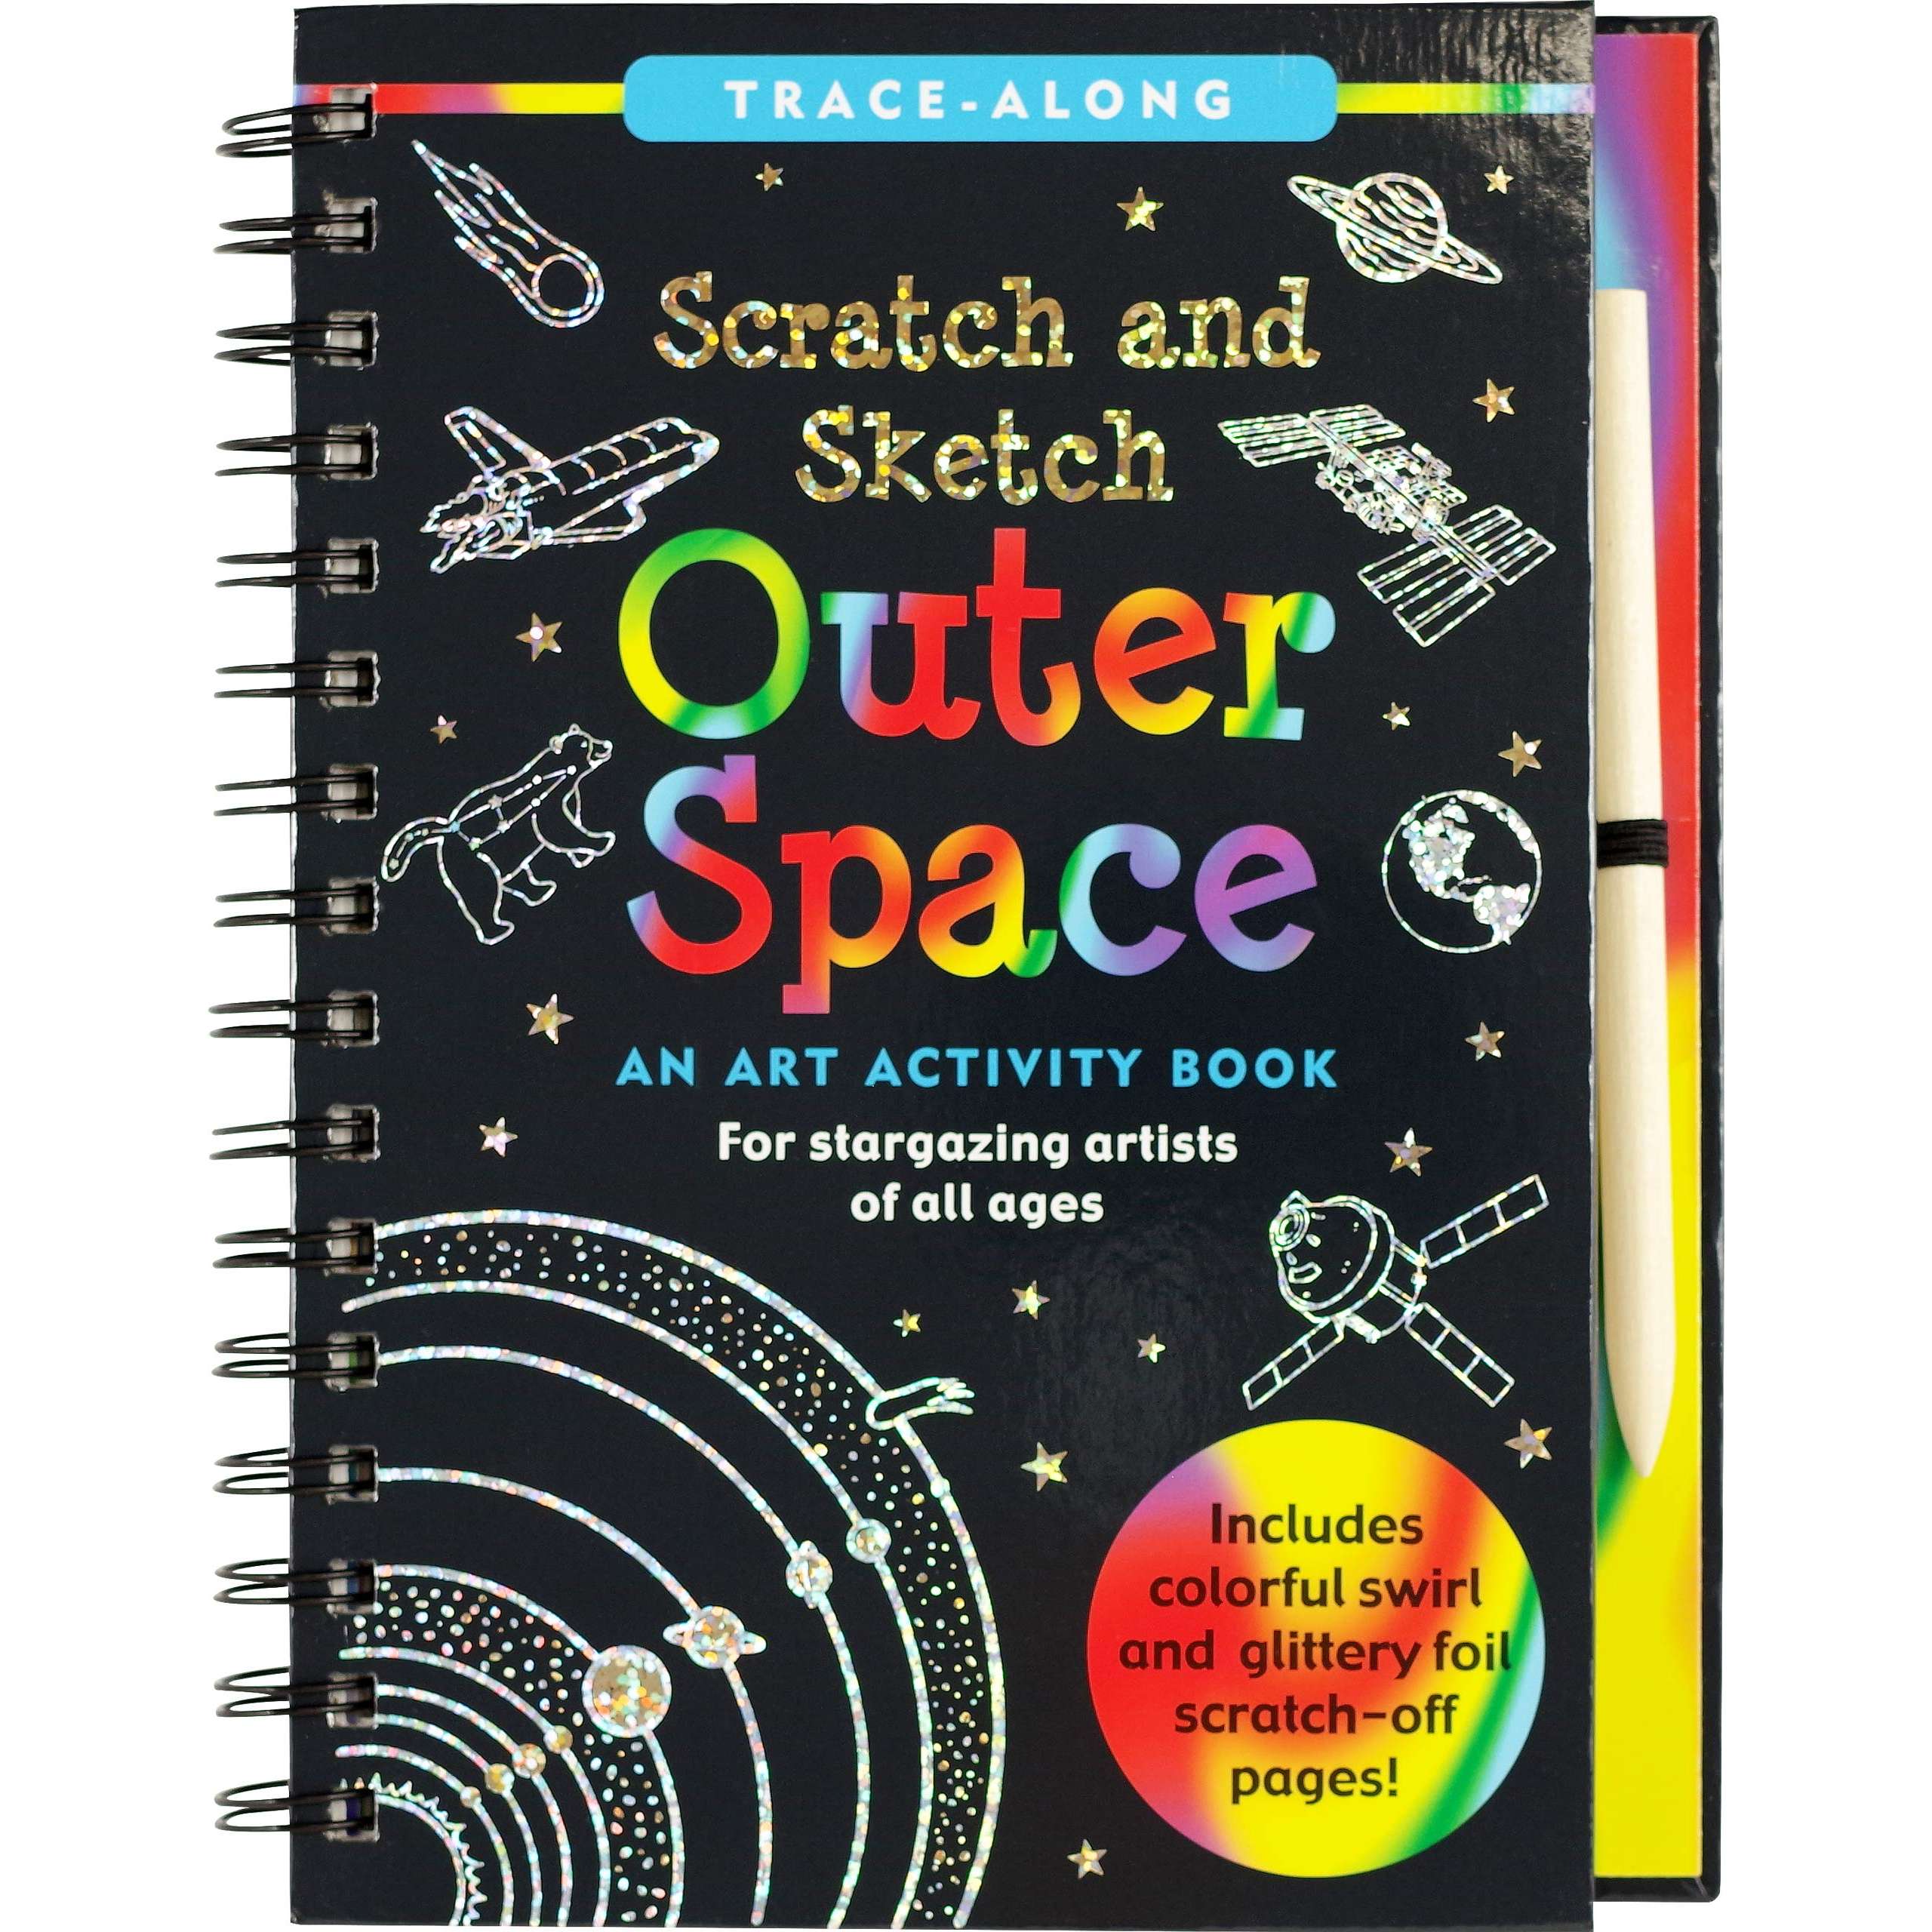 {NEW} Constellations Scratch & Sketch (Art, Activity Kit) (Trace-Along Scratch  and Sketch)